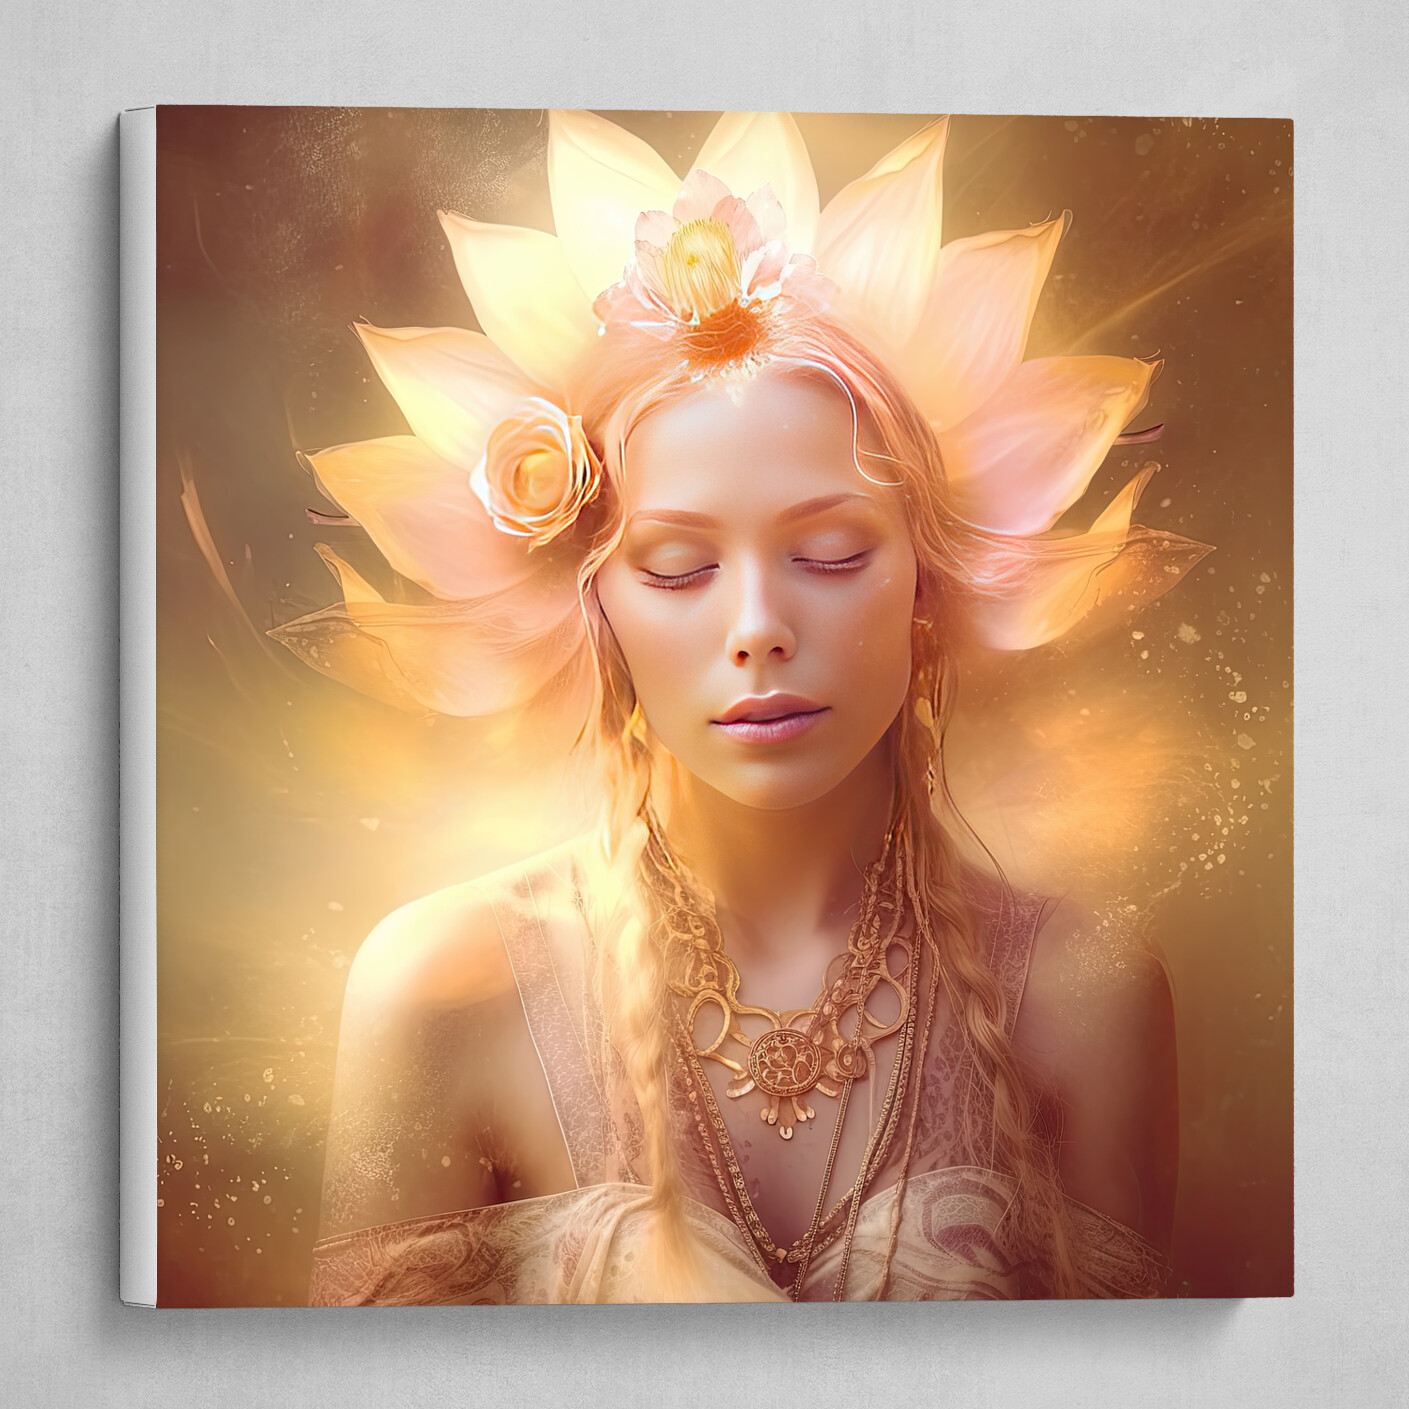 "Solar Serenity: Unveiling the Goddess of the Sun"